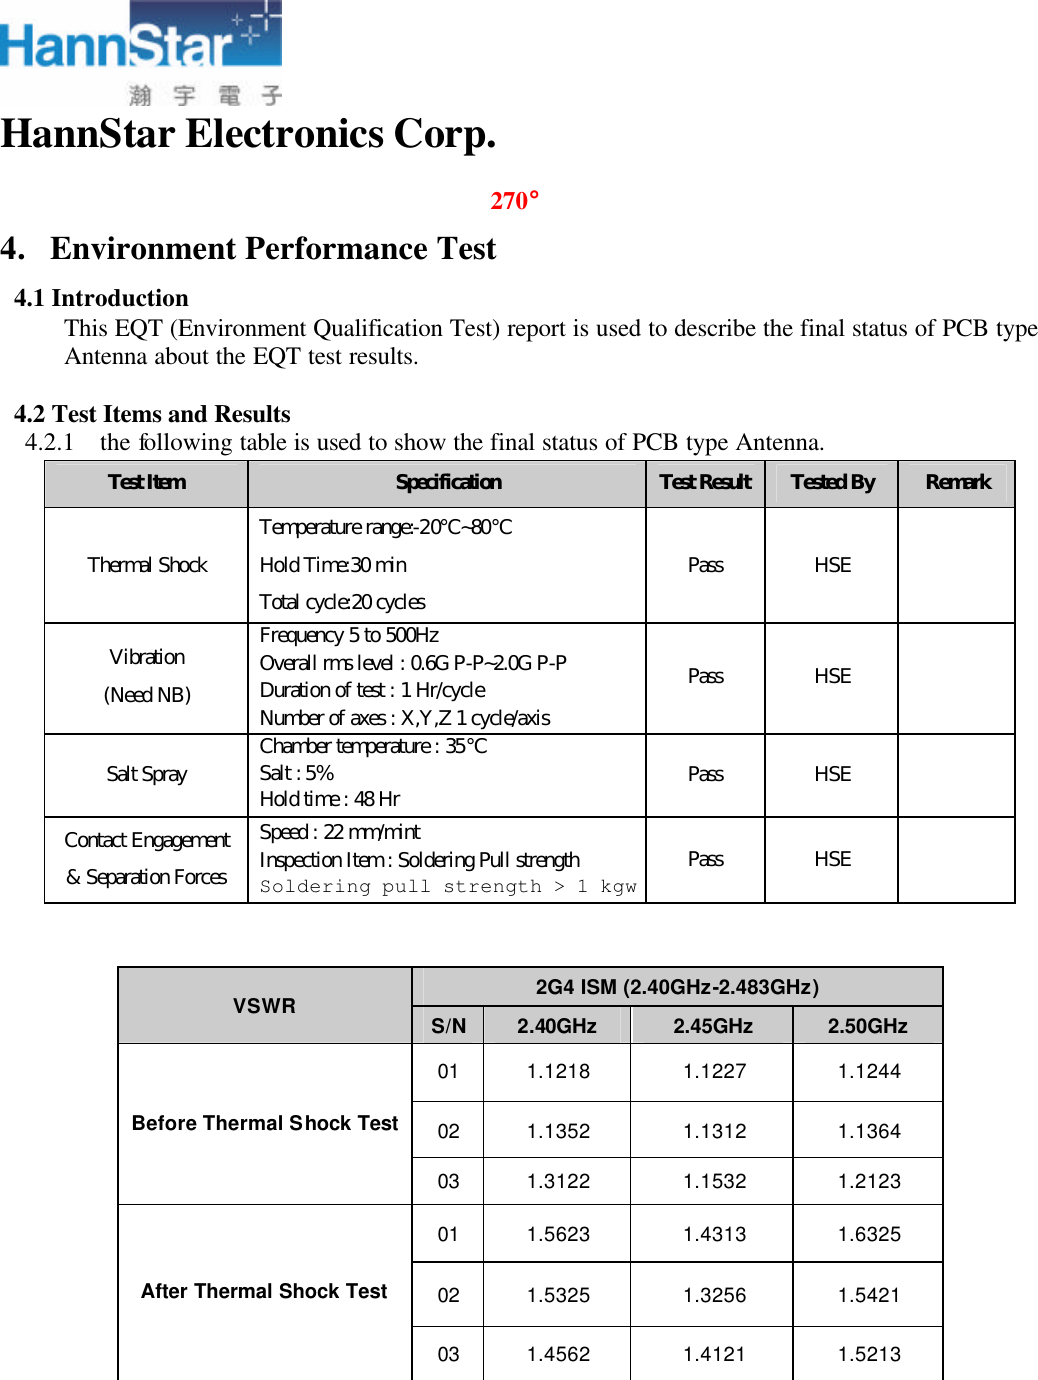  HannStar Electronics Corp.   4. Environment Performance Test 4.1 Introduction     This EQT (Environment Qualification Test) report is used to describe the final status of PCB type Antenna about the EQT test results.  4.2 Test Items and Results 4.2.1 the following table is used to show the final status of PCB type Antenna.                     Test Item Specification Test Result Tested By Remark Thermal Shock Temperature range:-20℃~80℃ Hold Time:30 min Total cycle:20 cycles Pass HSE   Vibration (Need NB) Frequency 5 to 500Hz Overall rms level : 0.6G P-P~2.0G P-P Duration of test : 1 Hr/cycle Number of axes : X,Y,Z 1 cycle/axis Pass HSE   Salt Spray Chamber temperature : 35℃ Salt : 5% Hold time : 48 Hr Pass HSE   Contact Engagement &amp; Separation Forces Speed : 22 mm/mint Inspection Item : Soldering Pull strength Soldering pull strength &gt; 1 kgw Pass HSE   2G4 ISM (2.40GHz-2.483GHz) VSWR S/N 2.40GHz 2.45GHz 2.50GHz 01 1.1218 1.1227 1.1244 02 1.1352 1.1312 1.1364 Before Thermal Shock Test 03 1.3122 1.1532 1.2123 01 1.5623 1.4313 1.6325 02 1.5325 1.3256 1.5421 After Thermal Shock Test 03 1.4562 1.4121 1.5213 270° 